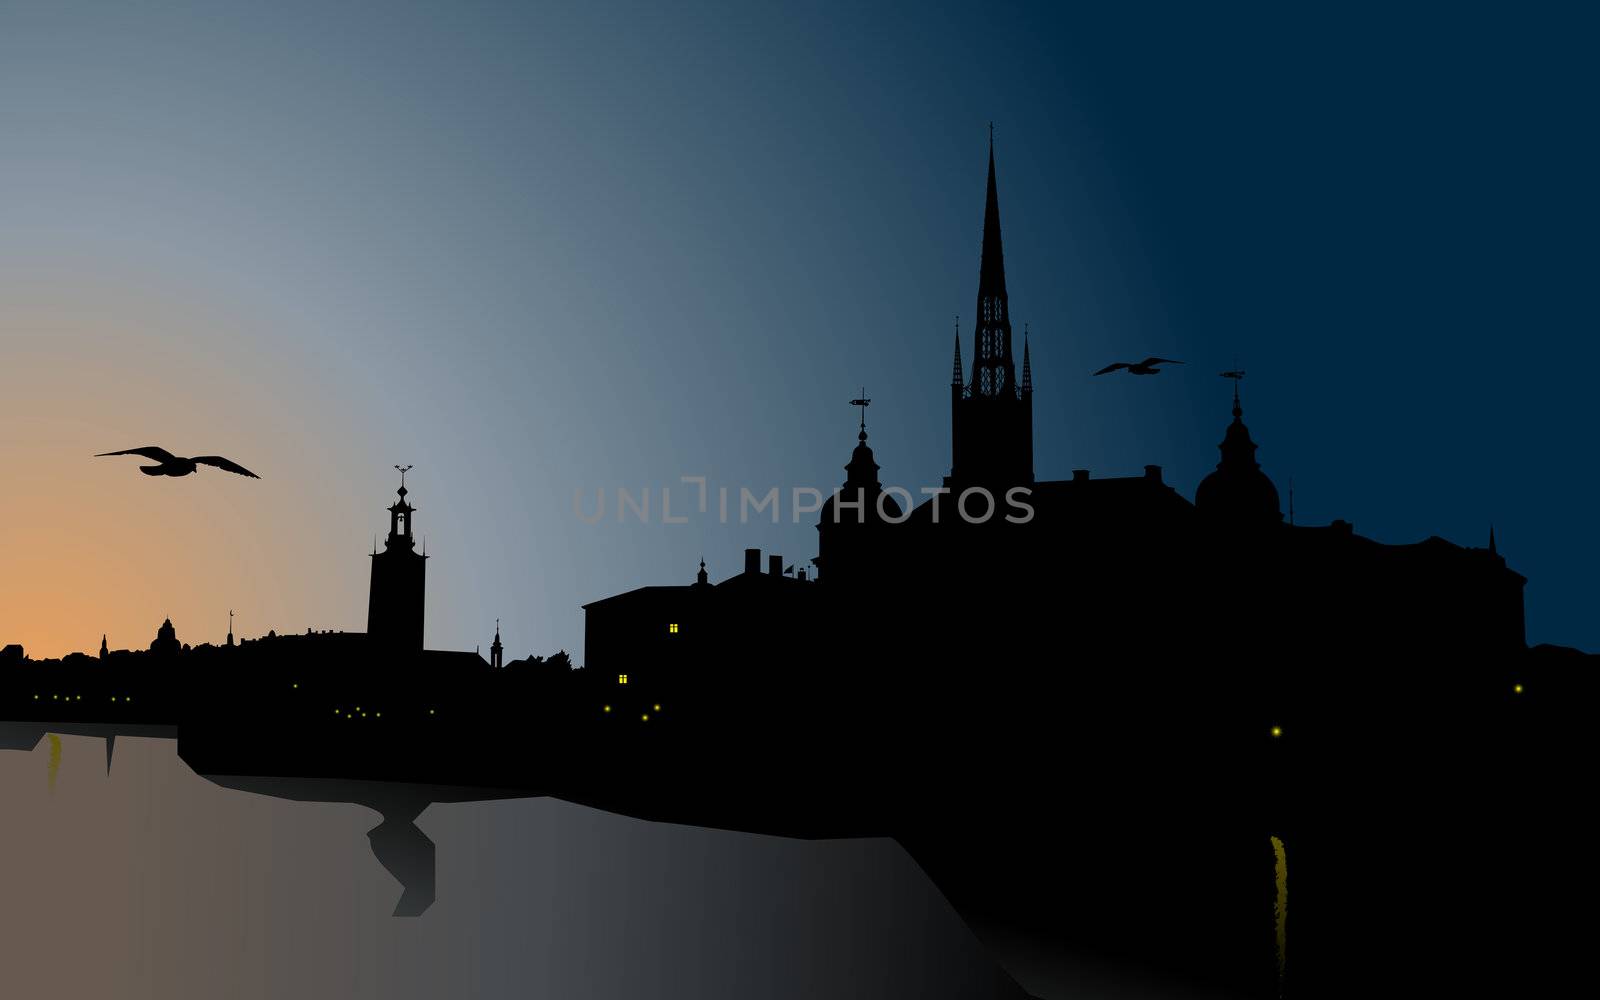 Silhouette of Stockholm, The City Hall, Riddarholm cathedral. Sweden